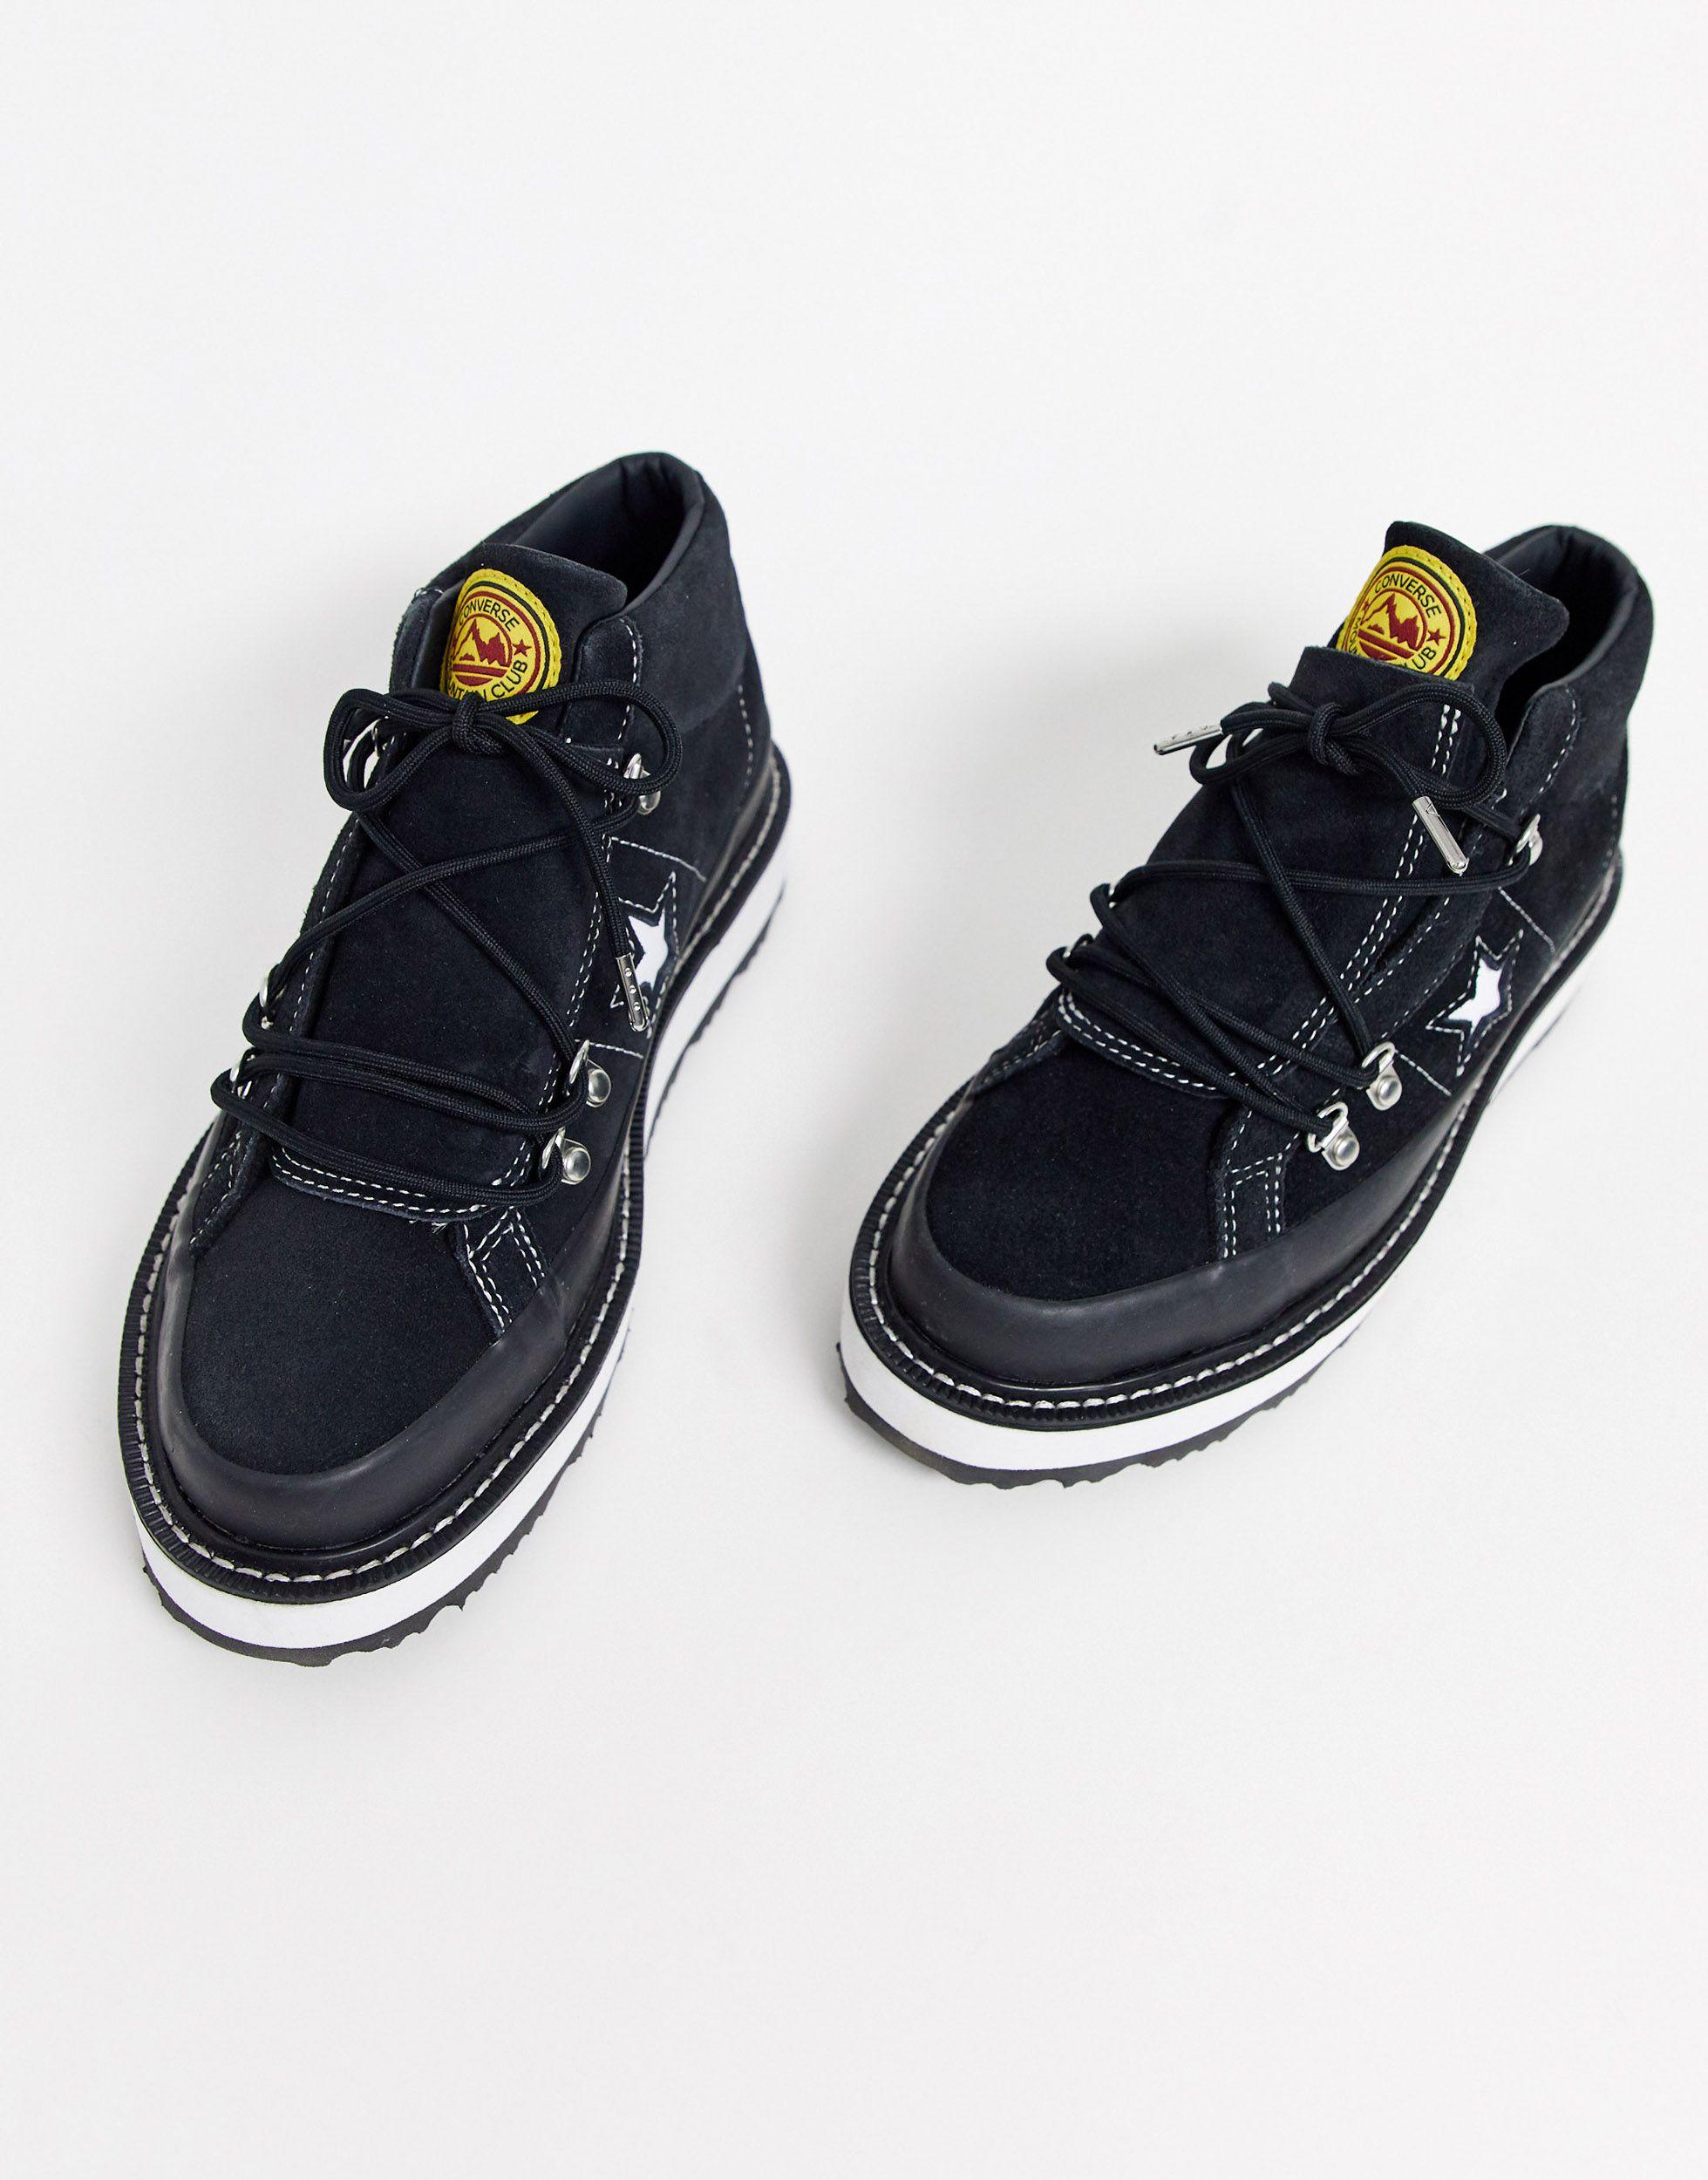 Converse One Star Hiker Boots in Black | Lyst